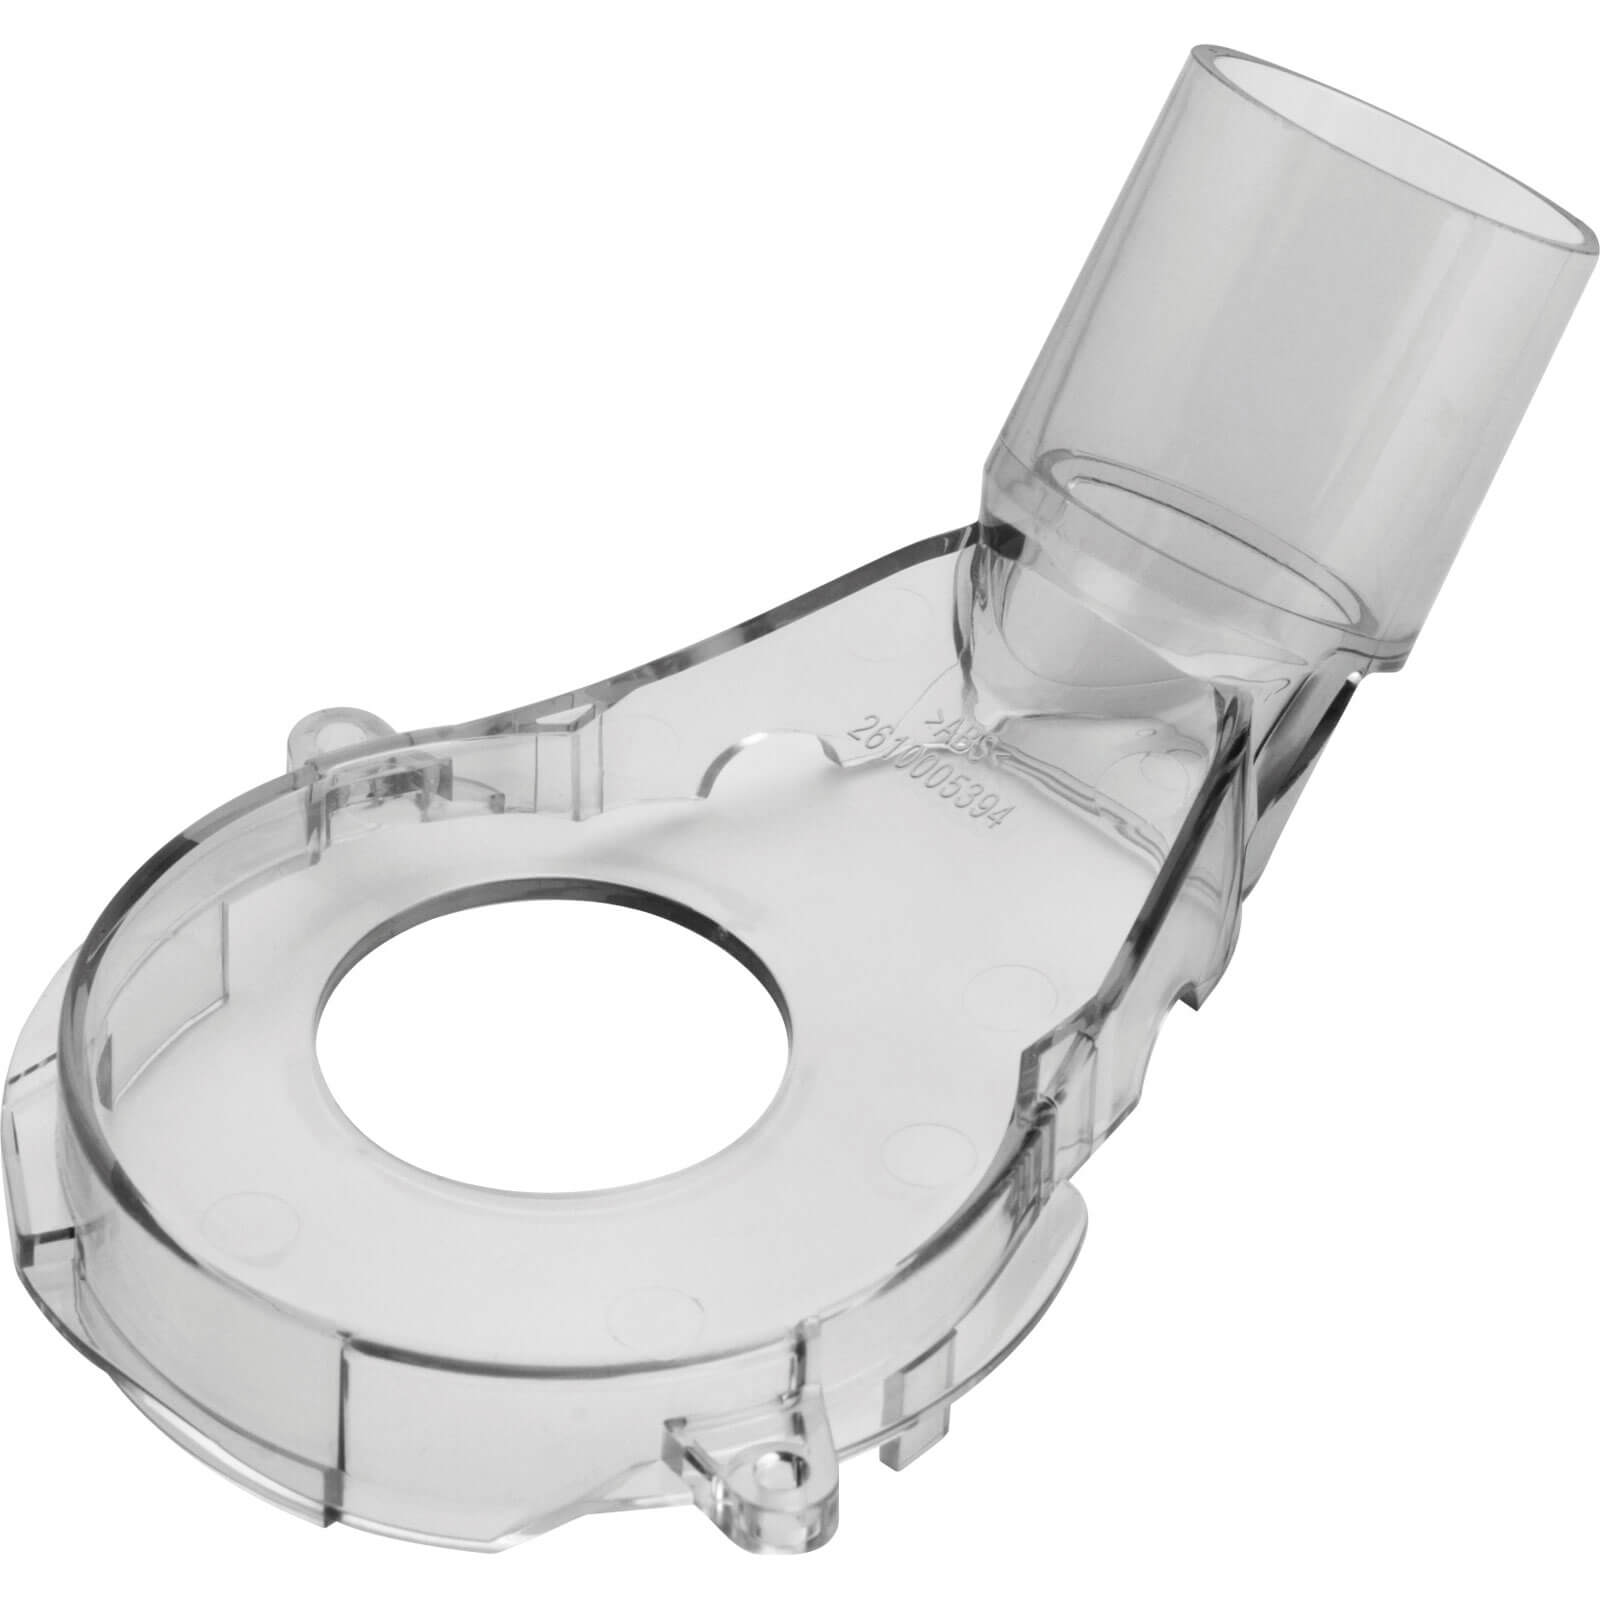 Image of Bosch Dust Extraction Adaptor for GMF 1600 and GOF 1600 CE